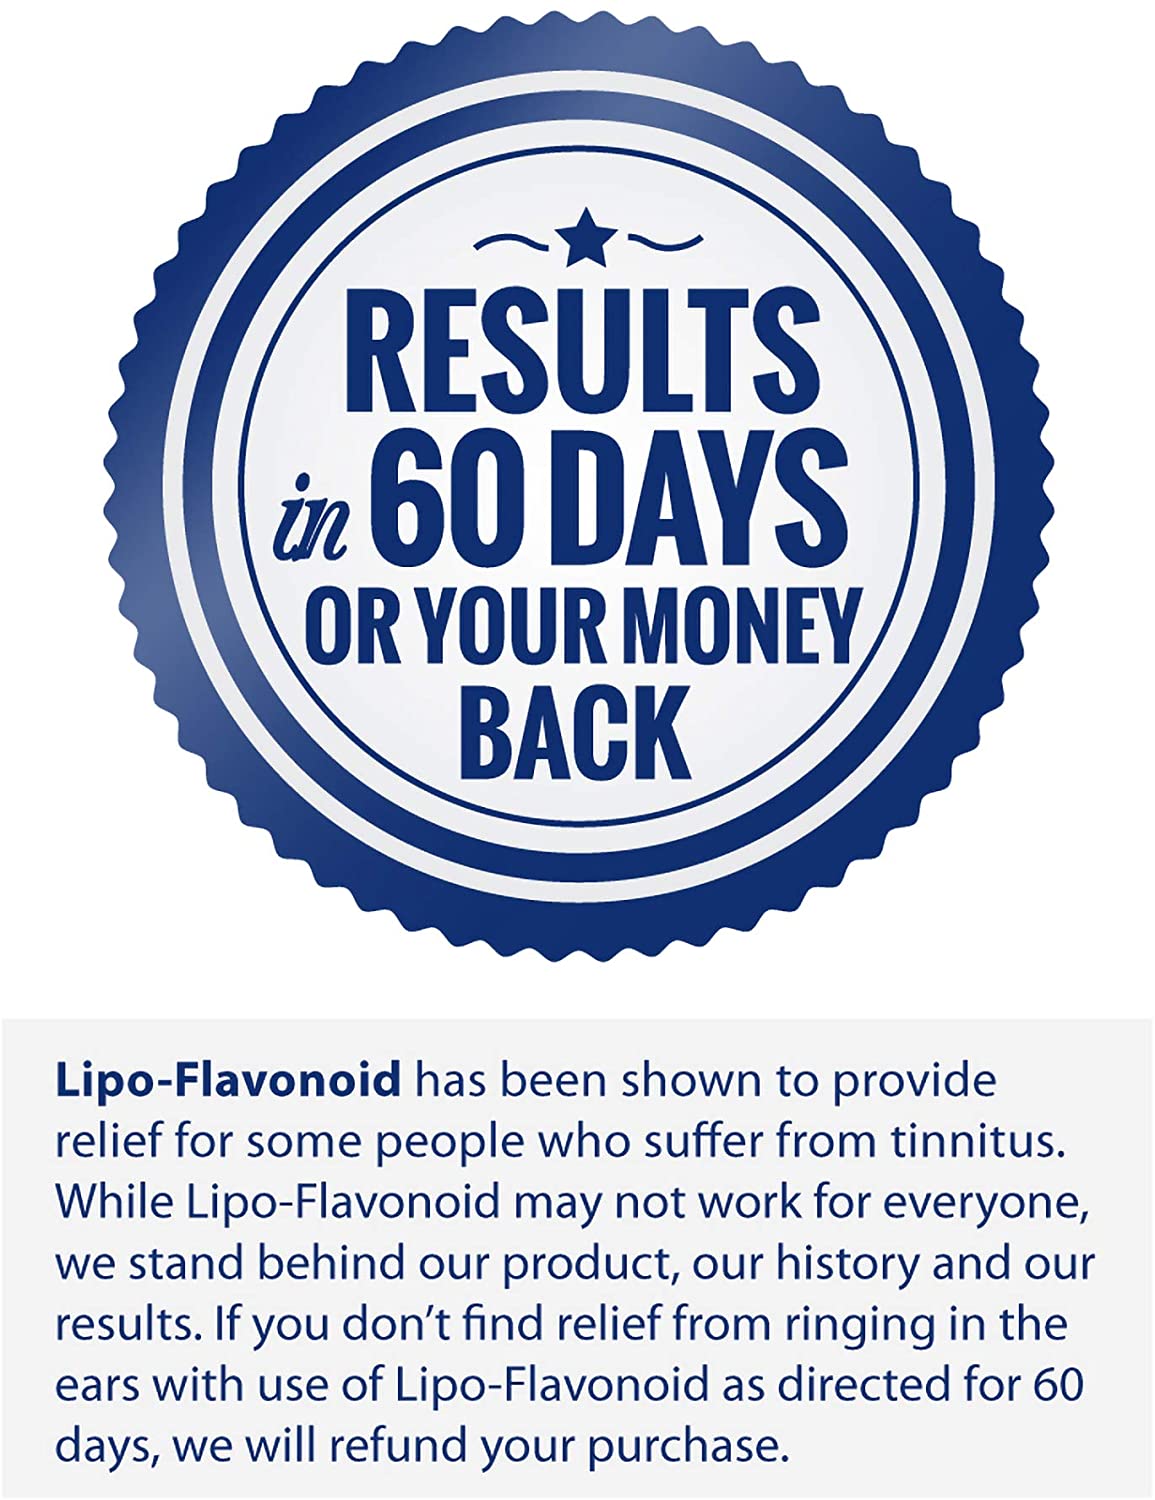 Lipo-Flavonoid day and night result in 60 days